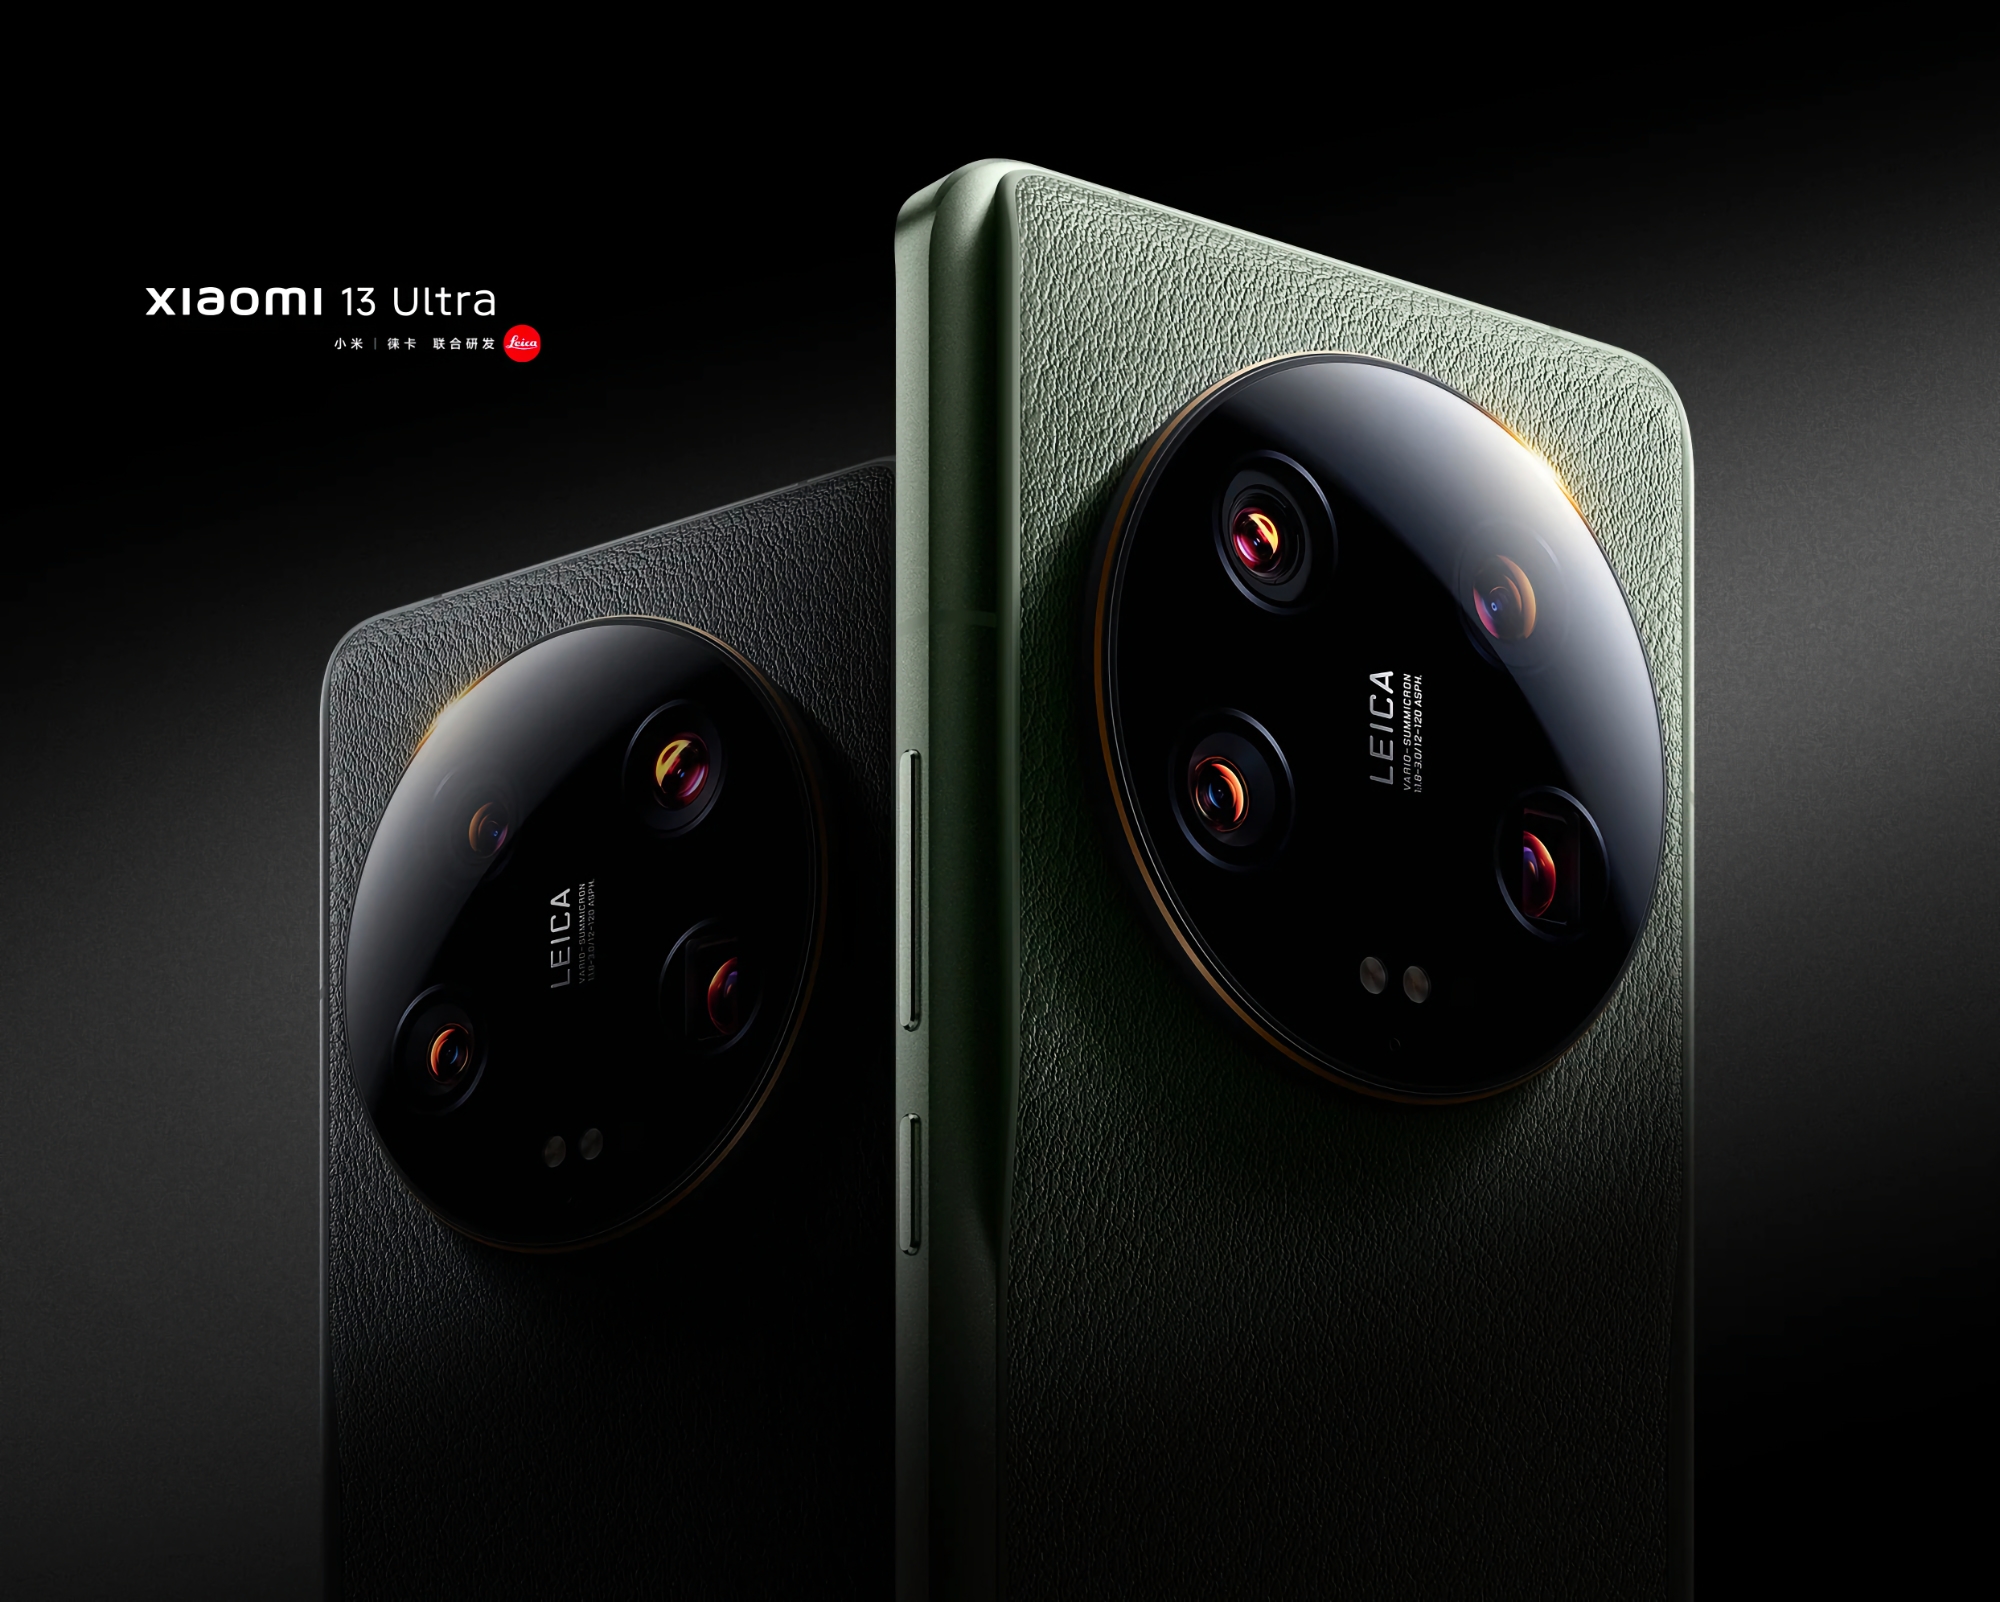 The Xiaomi 13 Ultra with 512GB of storage and a price of €1,299 has surfaced on the Dutch operator's website